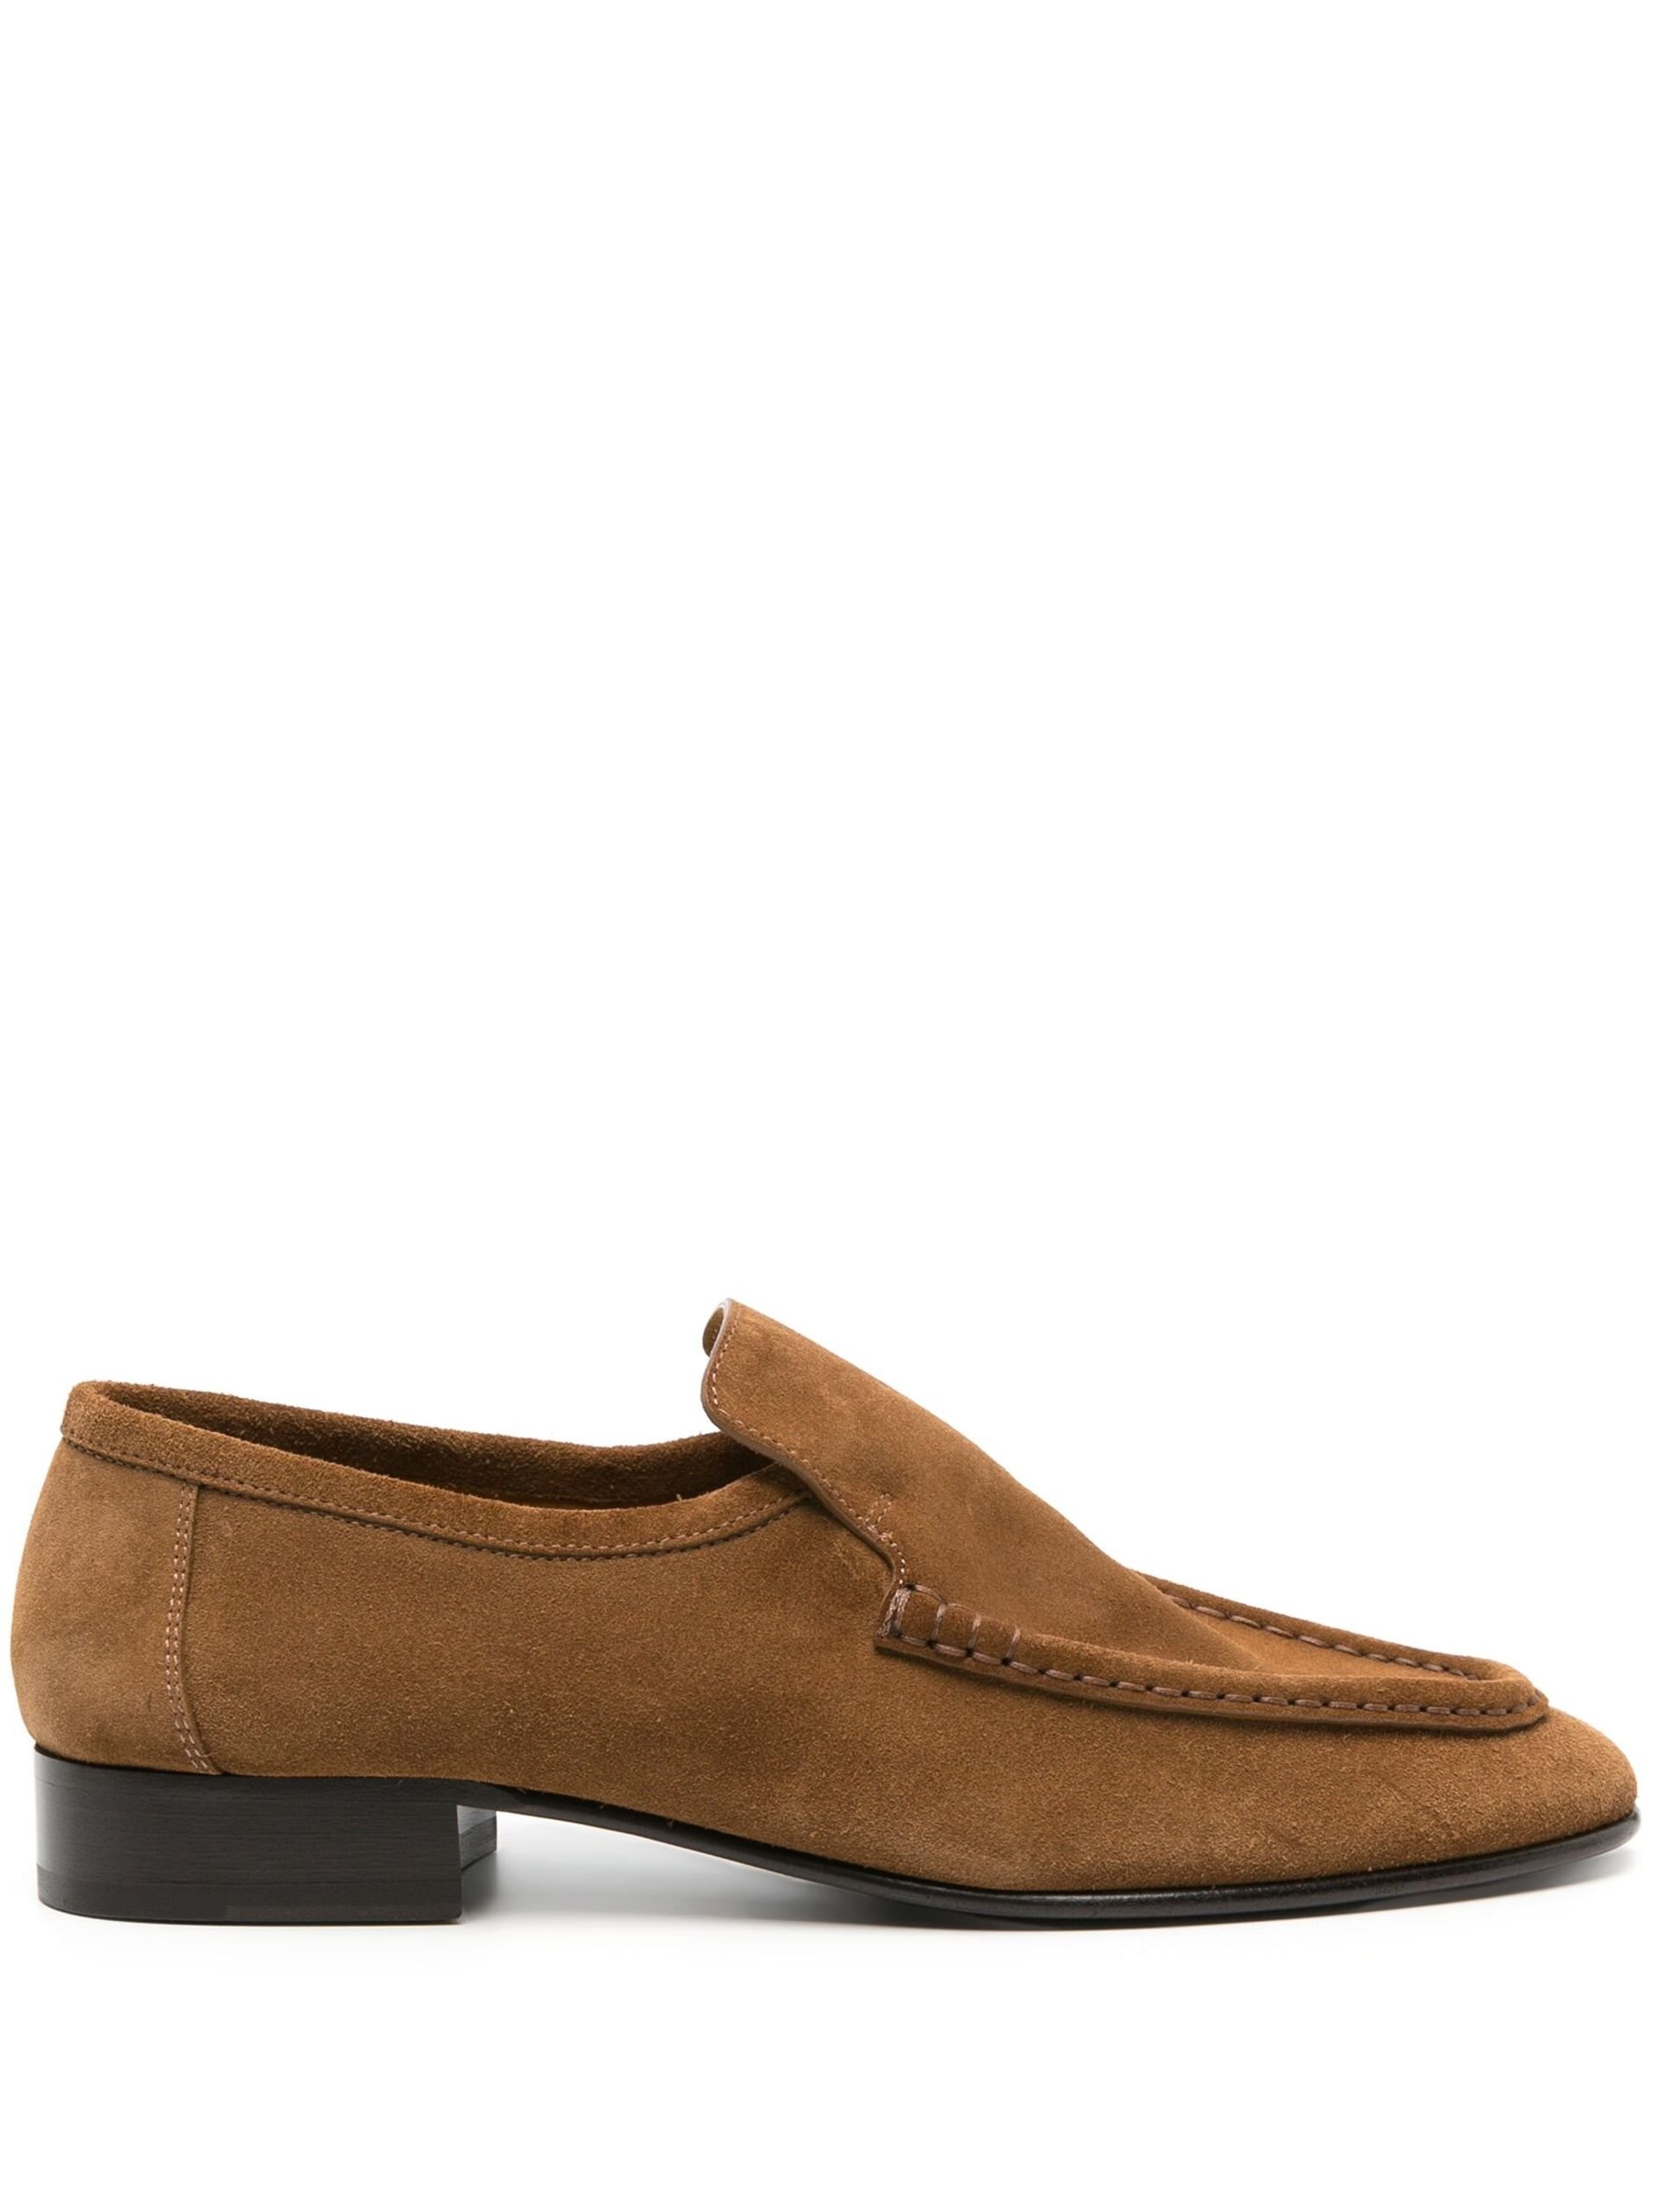 Brown Suede Loafers - 1